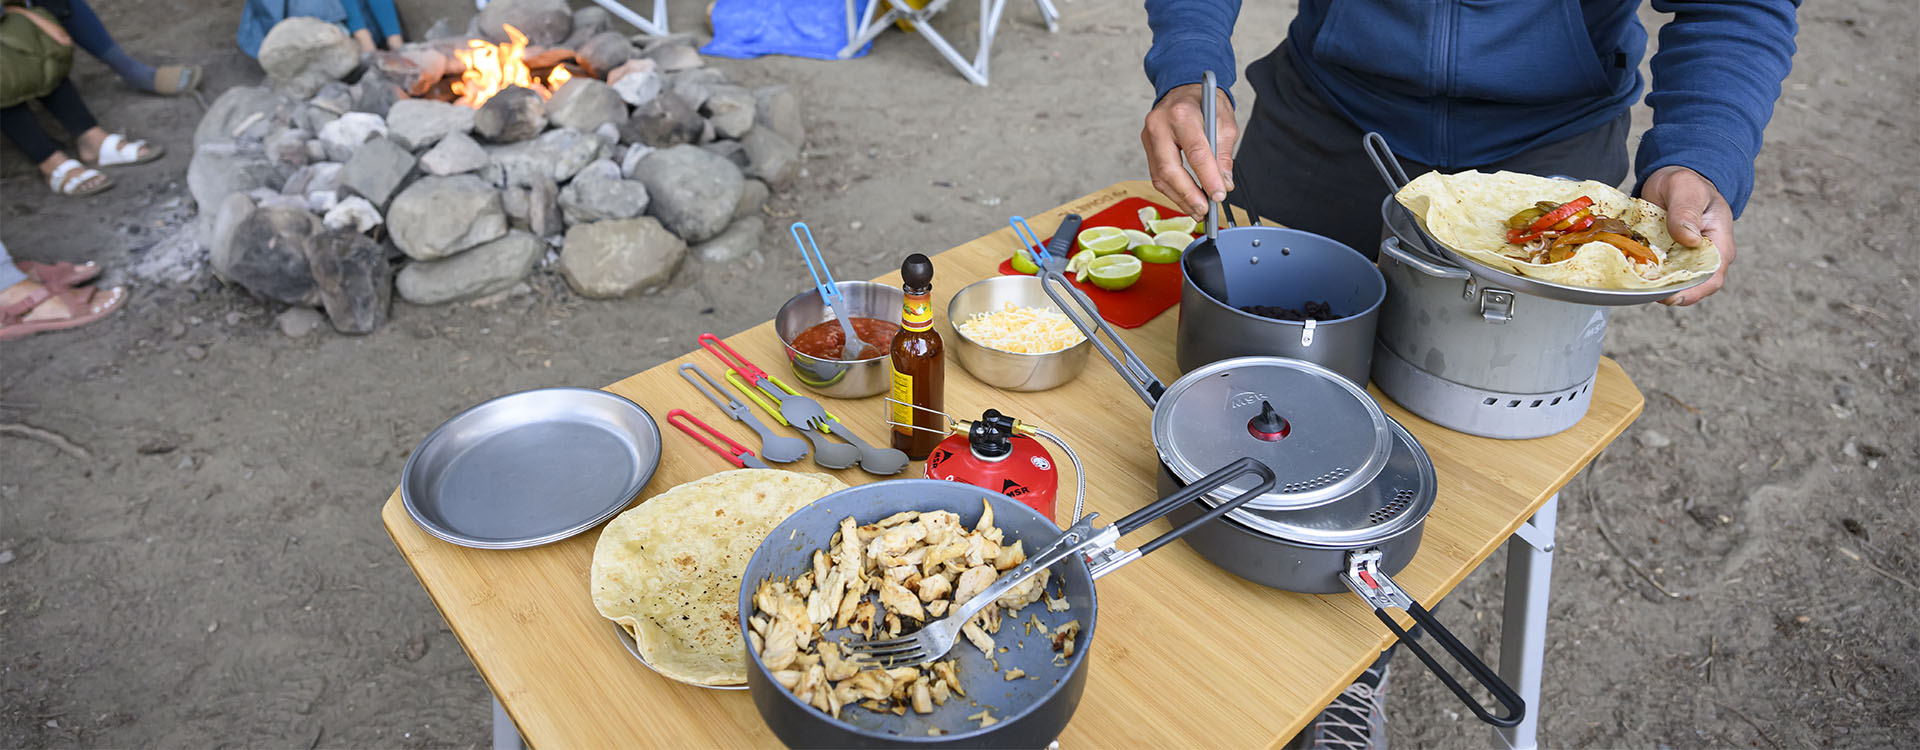 Culinary Camp Essentials - Everything you need to whip up an outdoor feast.